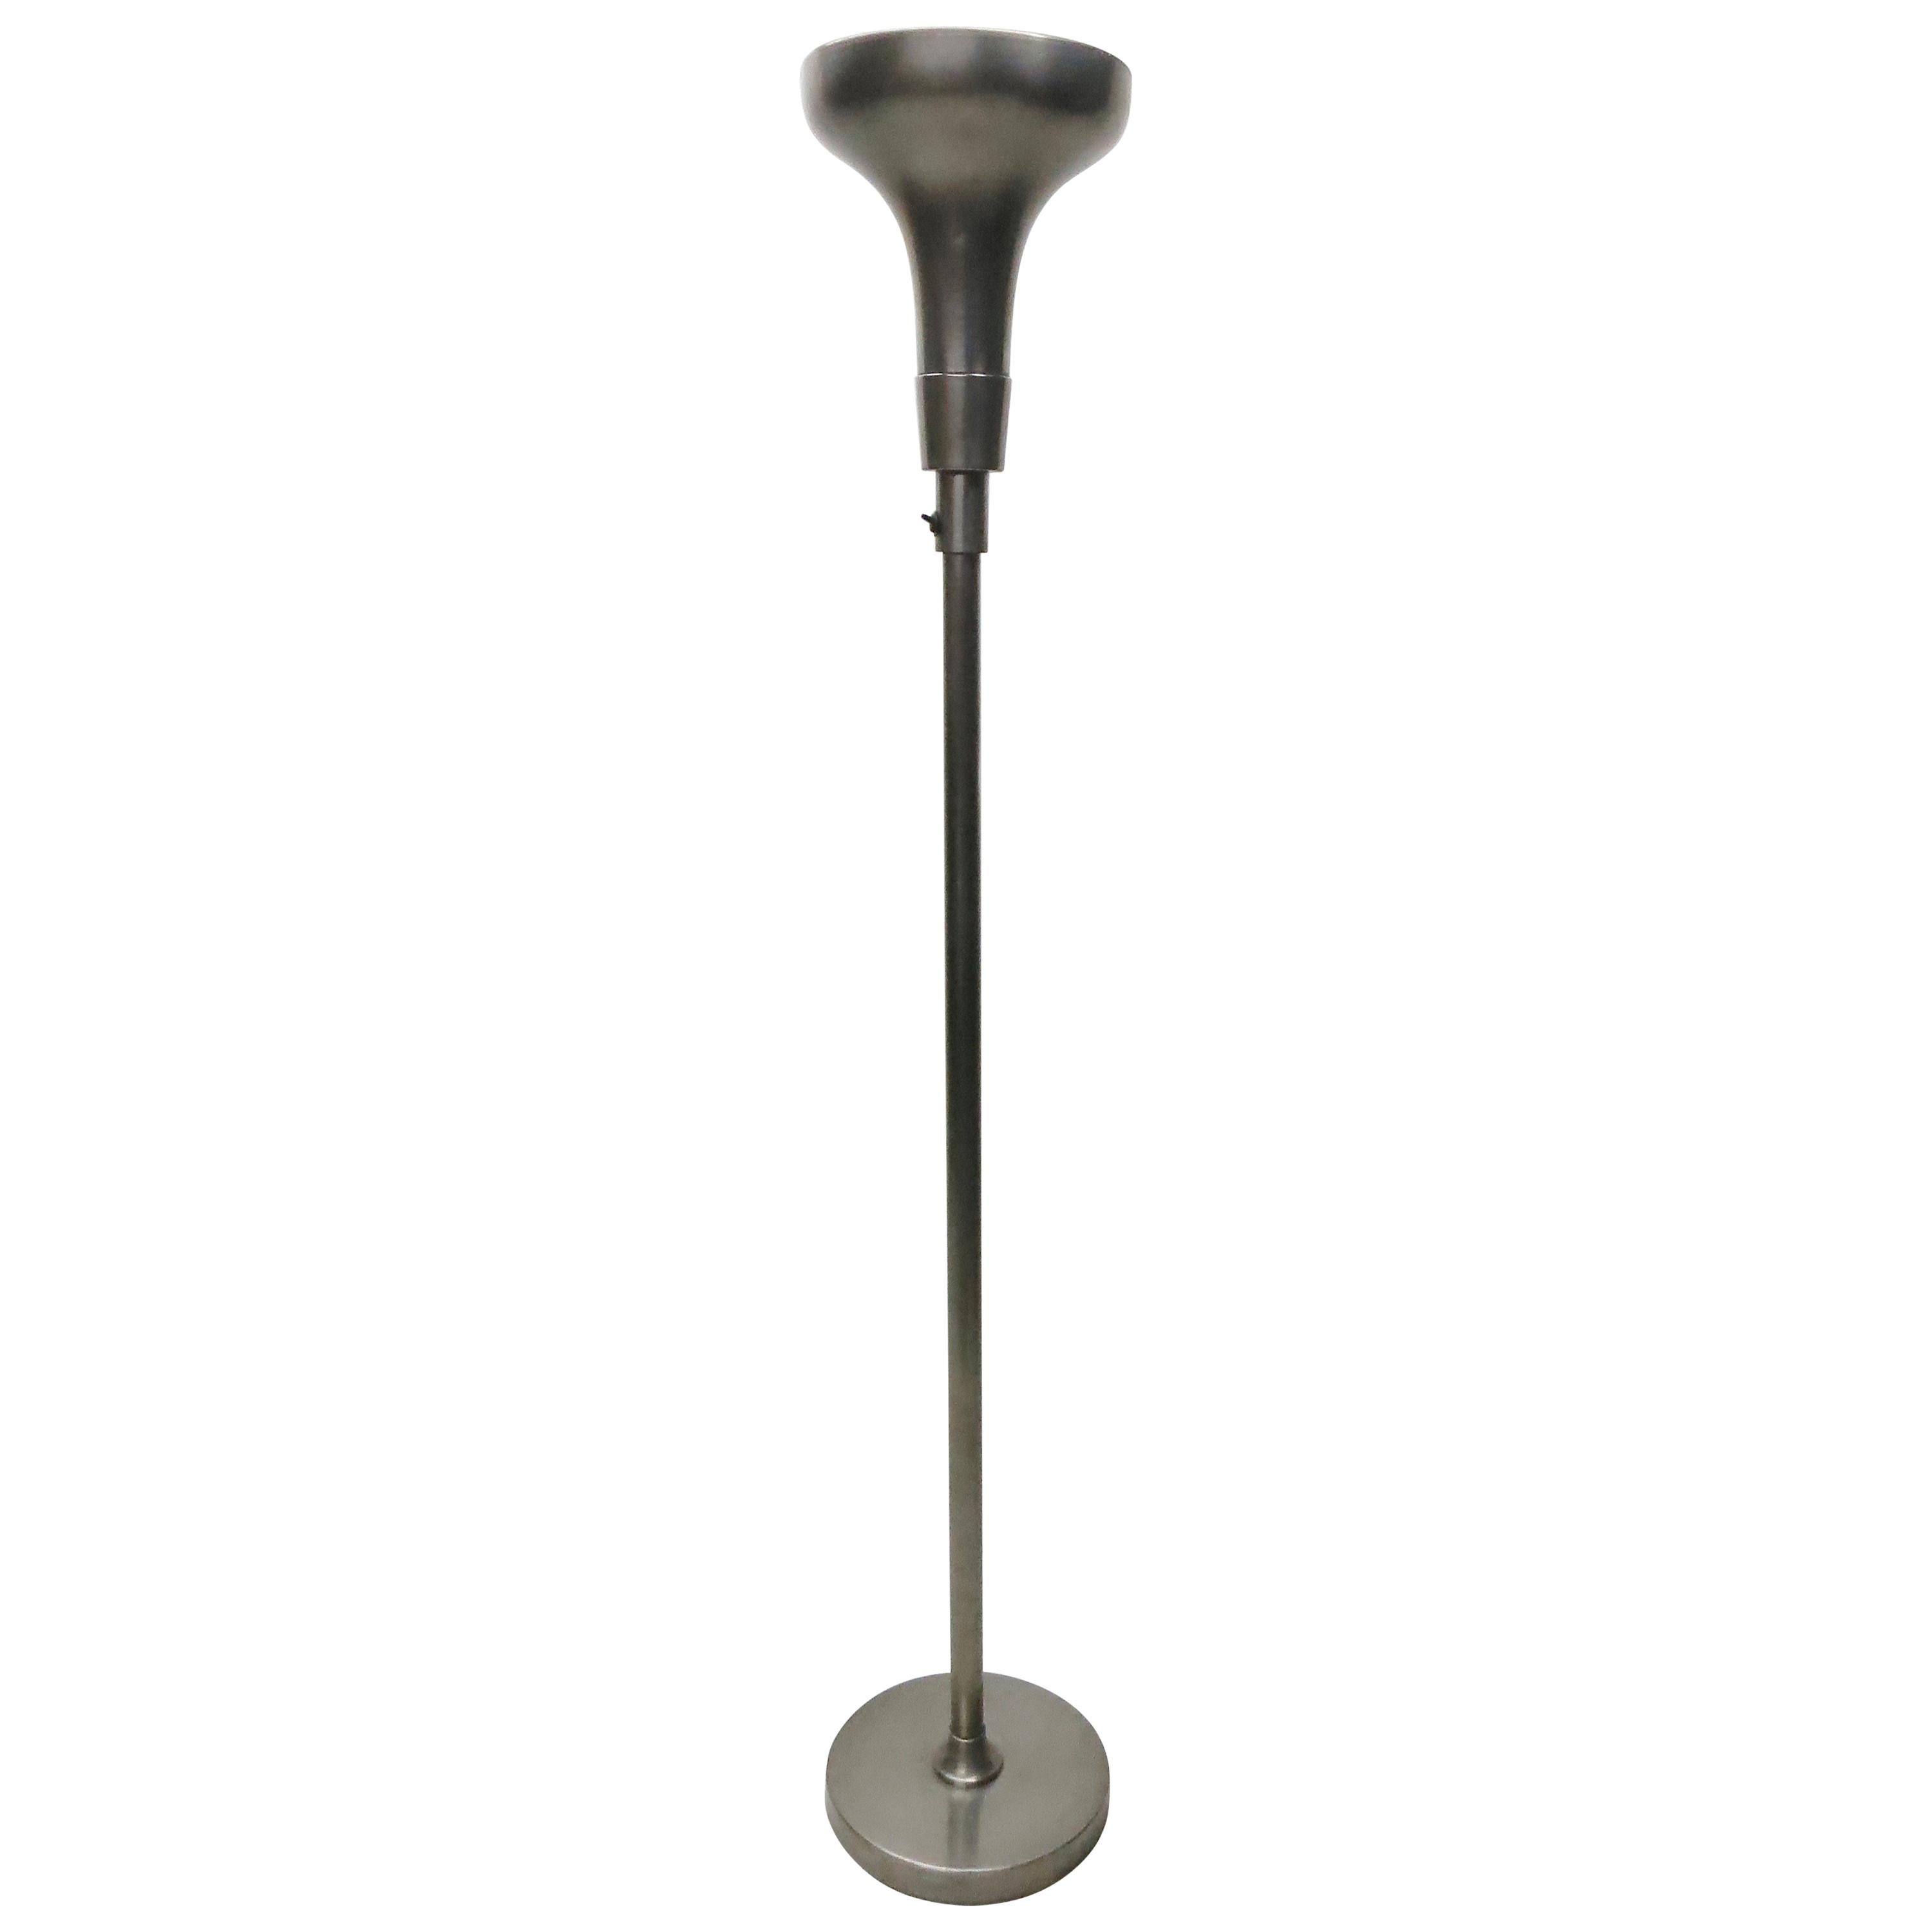 Nickel-Plated Copper Floor Lamp / Torchiere, France Circa 1930 For Sale